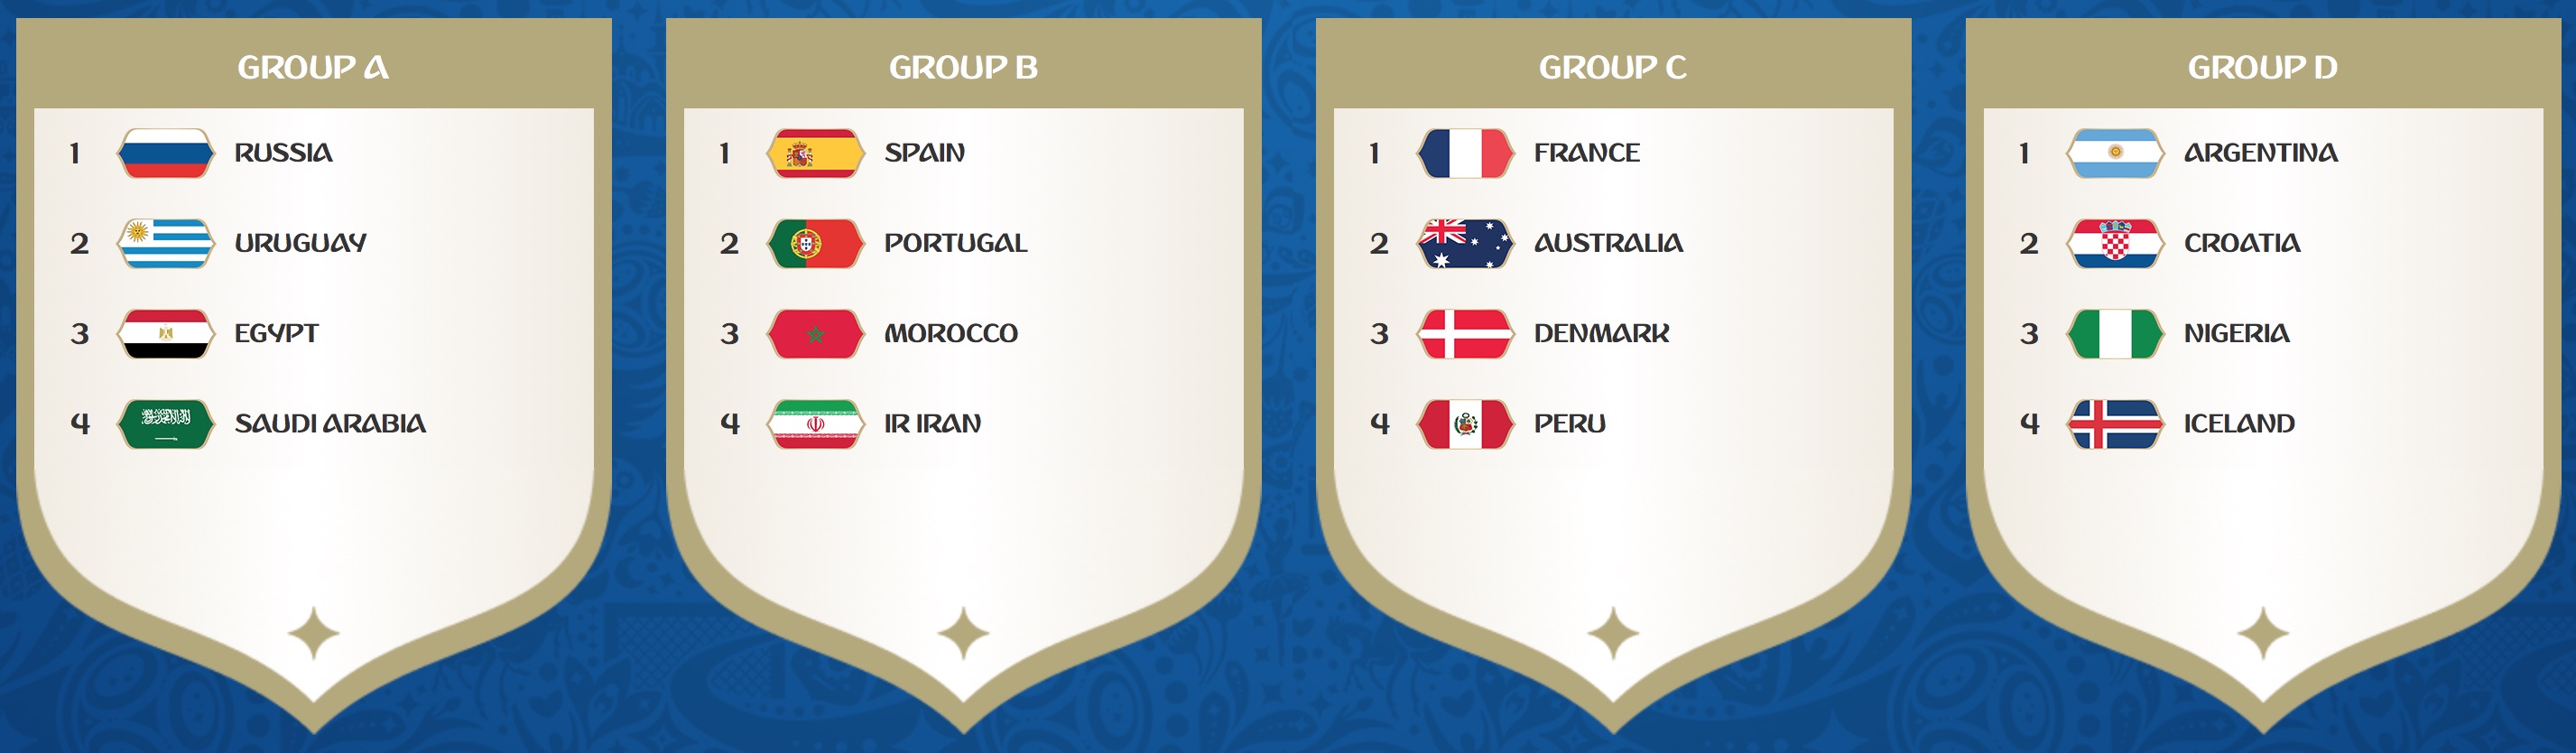 FIFA World Cup 2018 (Russia): Groups A to D